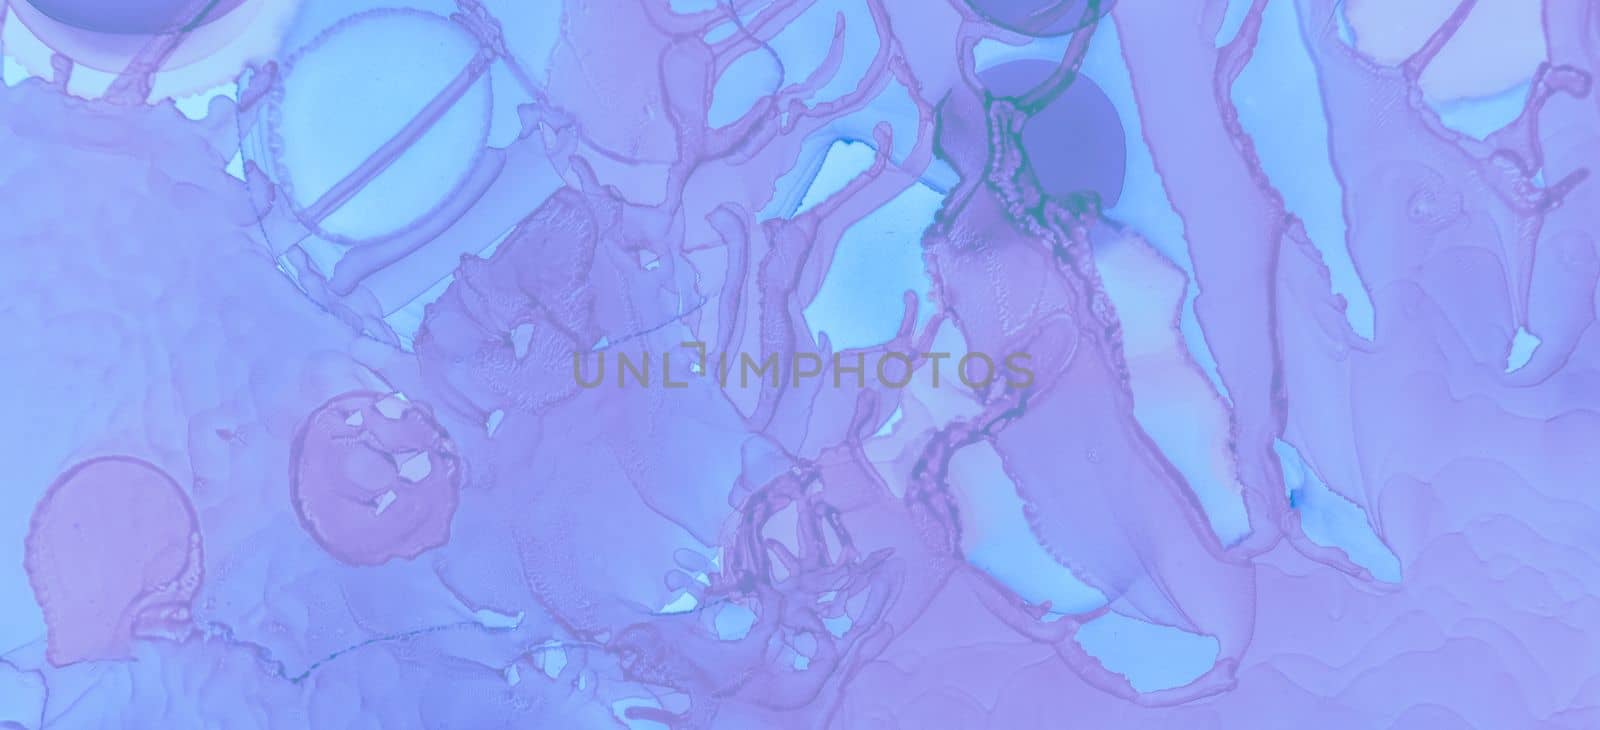 Pink Pastel Fluid Liquid. Watercolor Paint Background. Modern Ink Stains Texture. Blue Pastel Flow Design. Pastel Fluid Design. Pink Watercolor Wave Wallpaper. Fashion Ink Stains Marble.